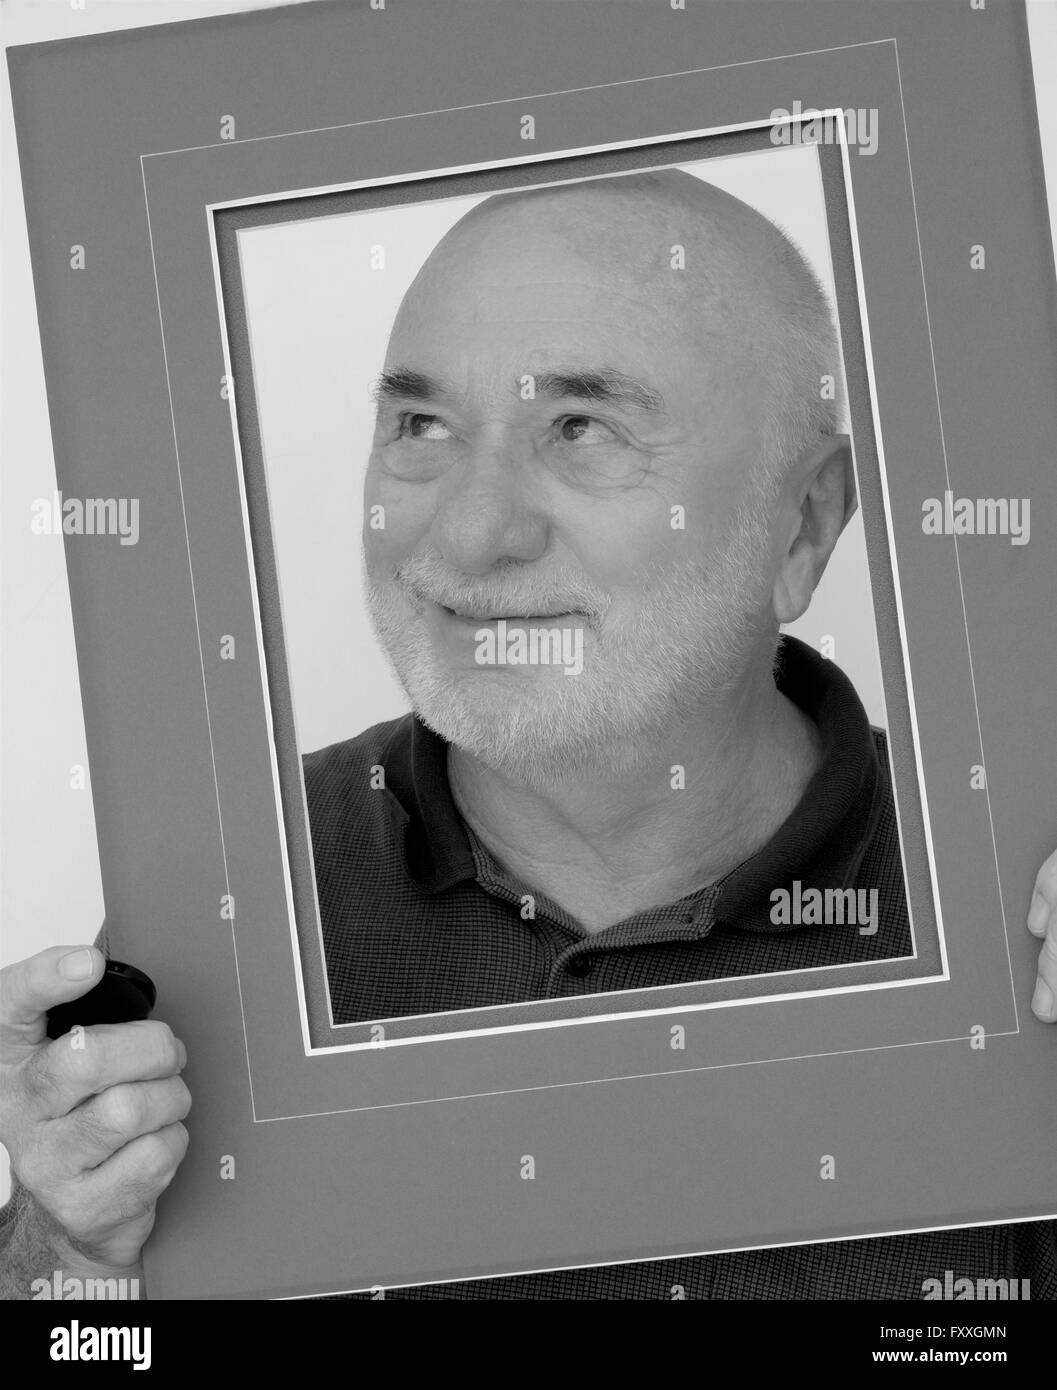 A cranky old man framed in black and white. Stock Photo